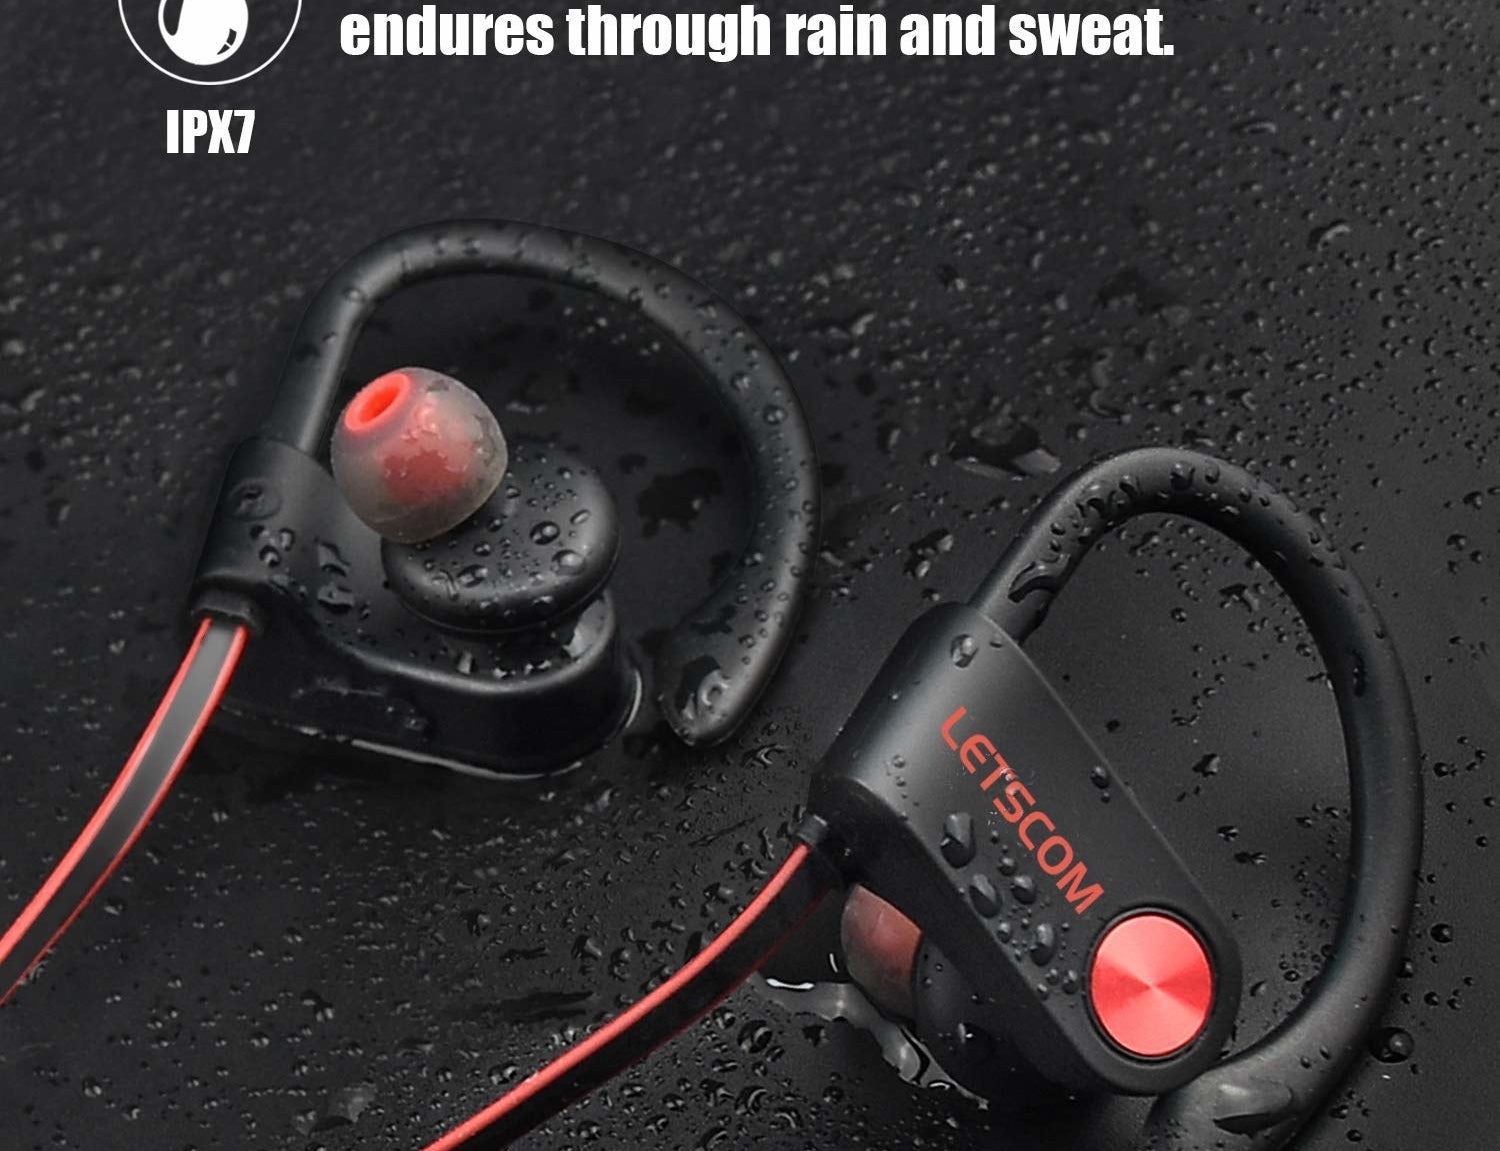 earbuds with over-ear pieces laying among droplets of water